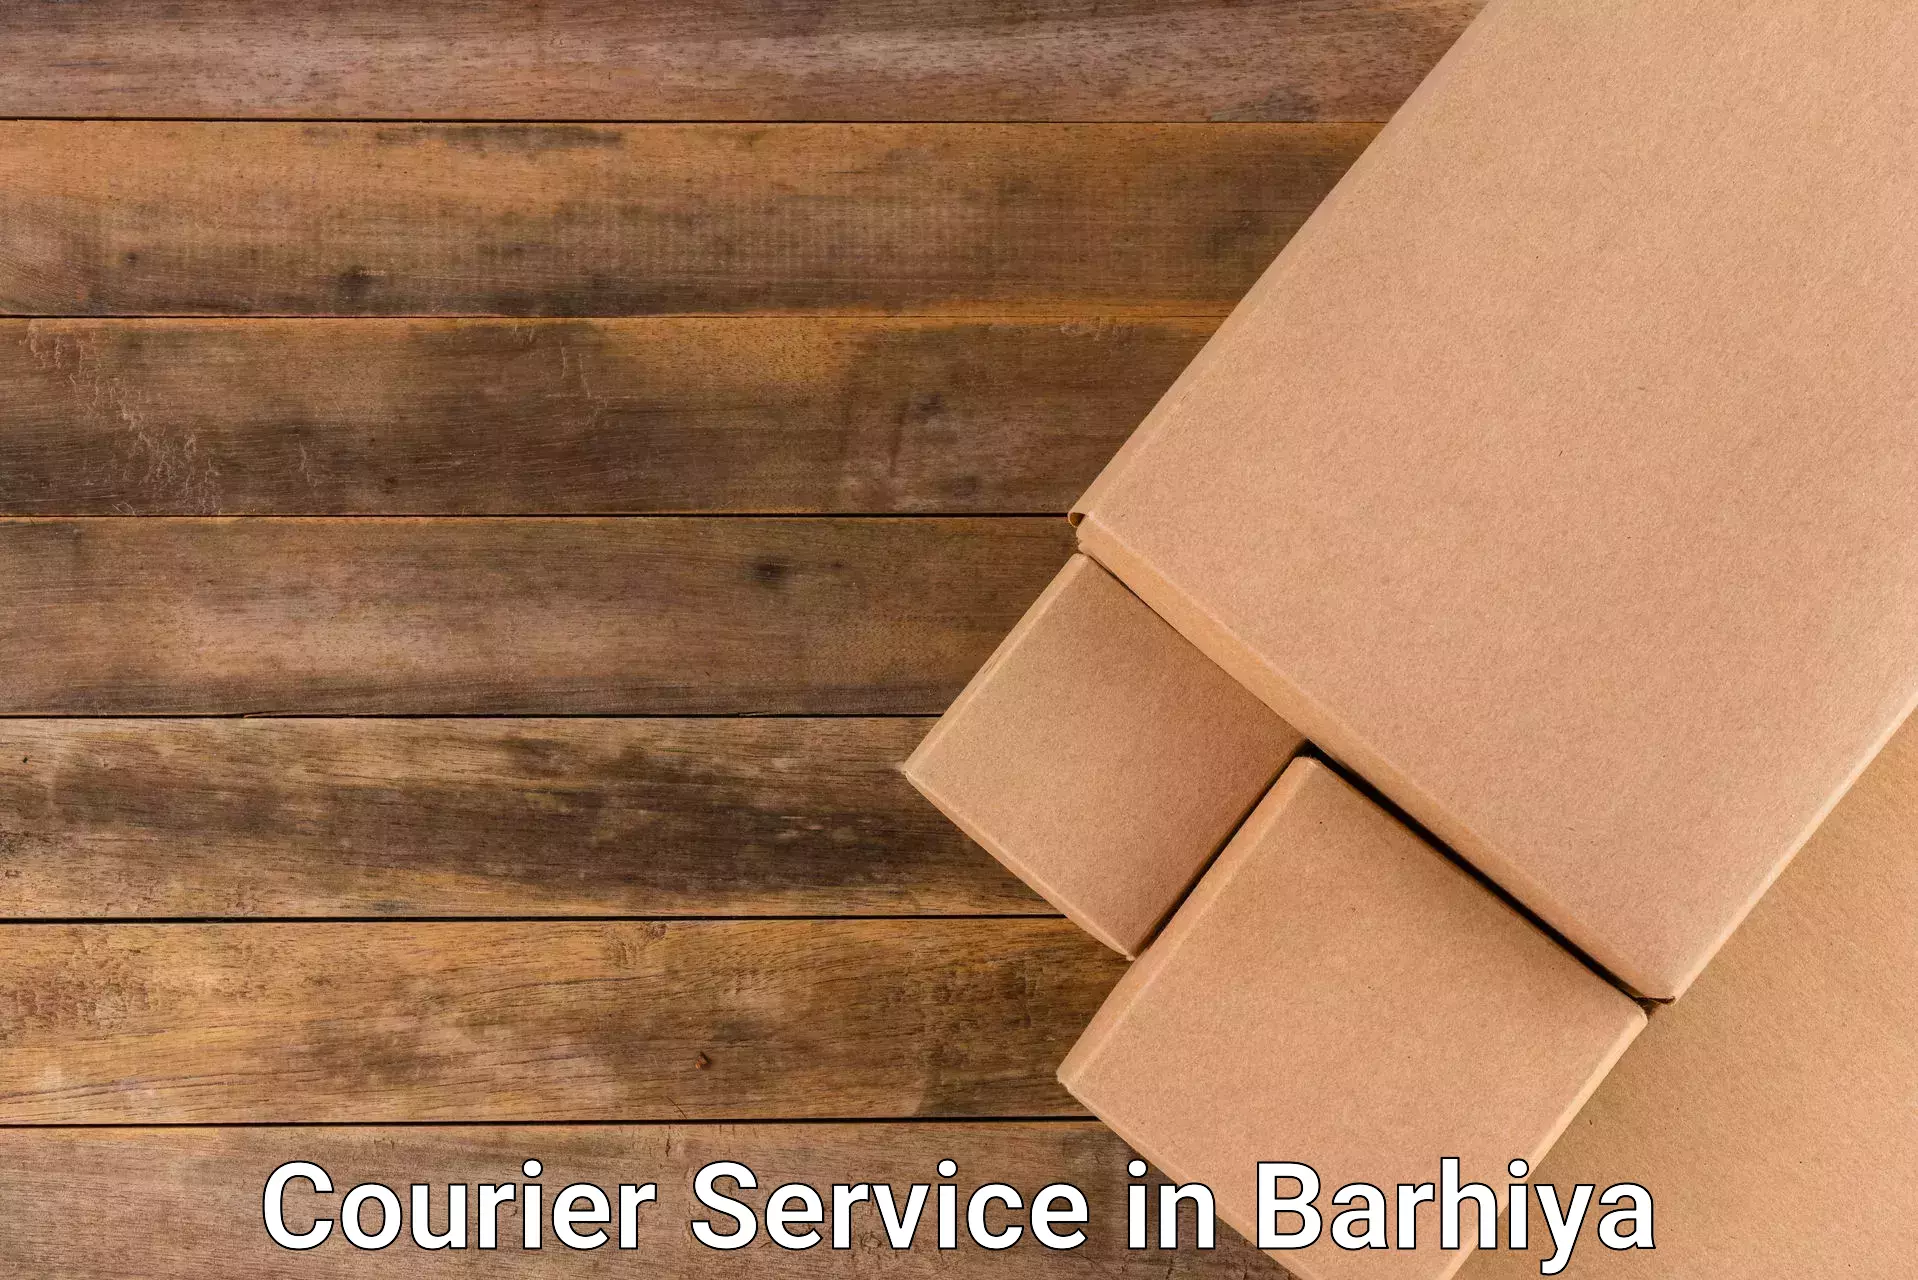 Short distance delivery in Barhiya